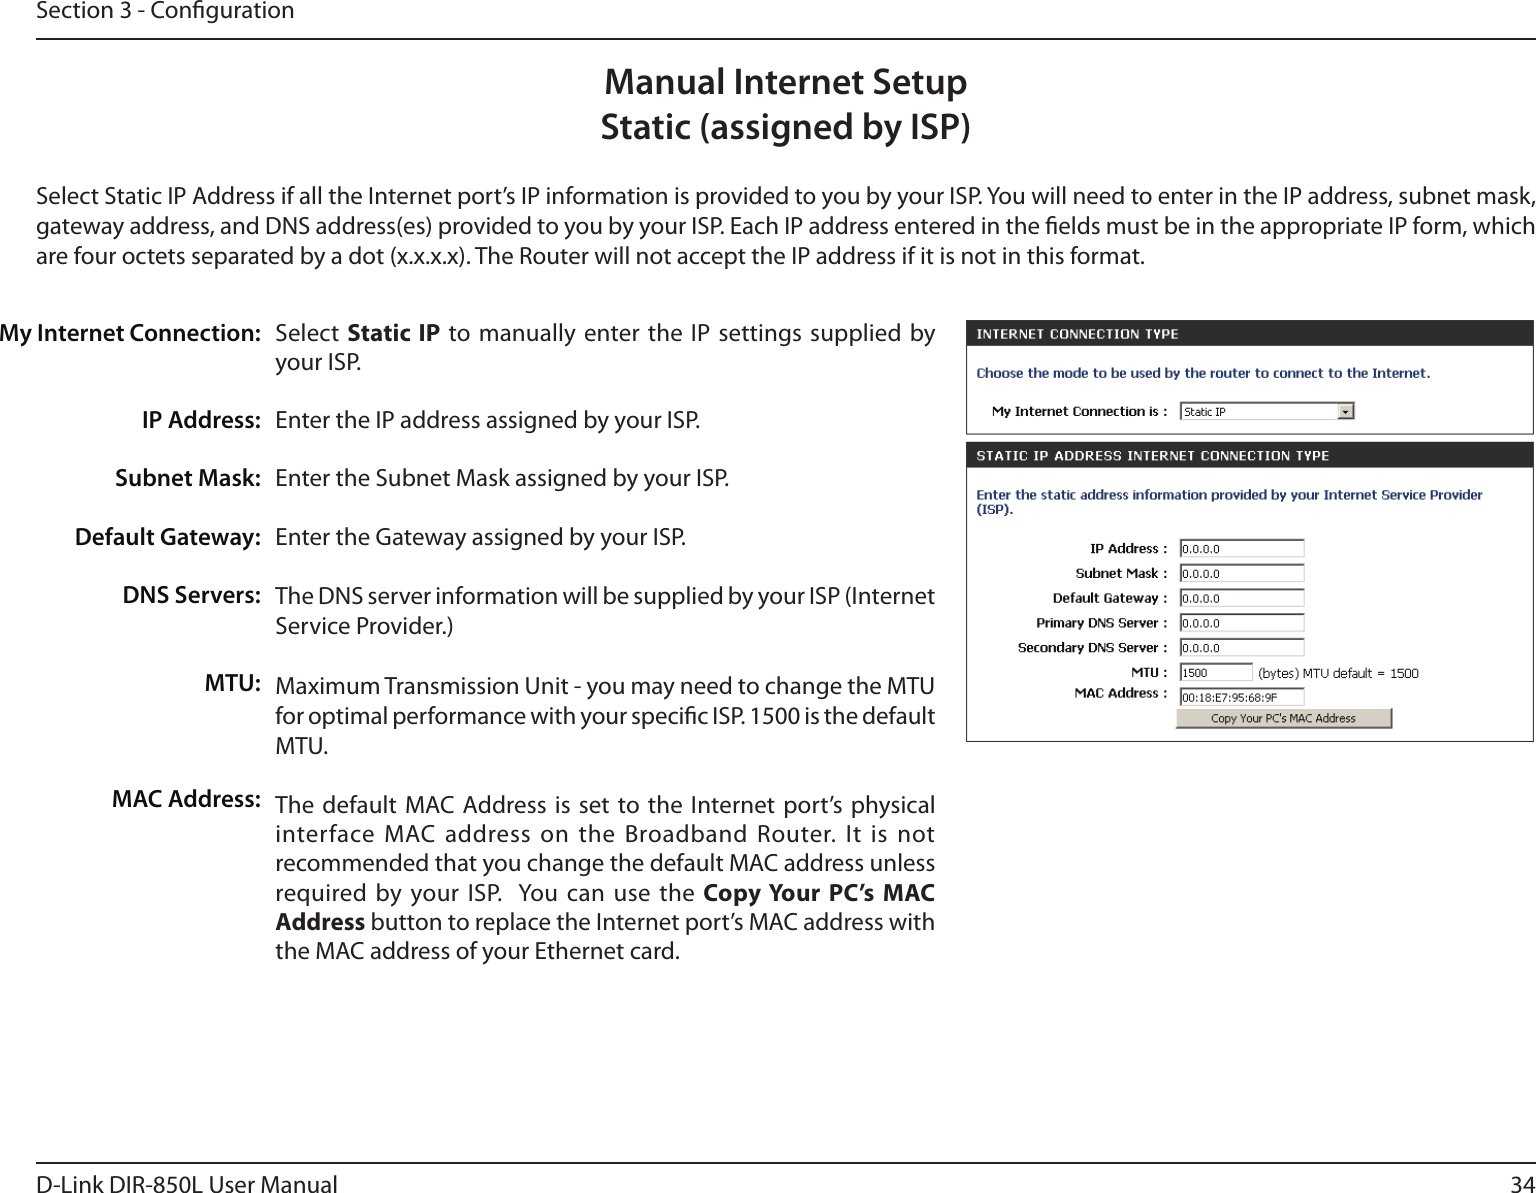 34D-Link DIR-850L User ManualSection 3 - CongurationSelect  Static IP to manually enter the IP  settings supplied  by your ISP.Enter the IP address assigned by your ISP.Enter the Subnet Mask assigned by your ISP.Enter the Gateway assigned by your ISP.The DNS server information will be supplied by your ISP (Internet Service Provider.)Maximum Transmission Unit - you may need to change the MTU for optimal performance with your specic ISP. 1500 is the default MTU.The default MAC Address is set to the Internet port’s  physical interface  MAC address on the Broadband Router. It  is not recommended that you change the default MAC address unless required by your ISP.  You can  use the Copy Your  PC’s  MAC Address button to replace the Internet port’s MAC address with the MAC address of your Ethernet card.My Internet Connection:IP Address:Subnet Mask:Default Gateway:DNS Servers:MTU:MAC Address:Manual Internet SetupStatic (assigned by ISP)Select Static IP Address if all the Internet port’s IP information is provided to you by your ISP. You will need to enter in the IP address, subnet mask, gateway address, and DNS address(es) provided to you by your ISP. Each IP address entered in the elds must be in the appropriate IP form, which are four octets separated by a dot (x.x.x.x). The Router will not accept the IP address if it is not in this format.